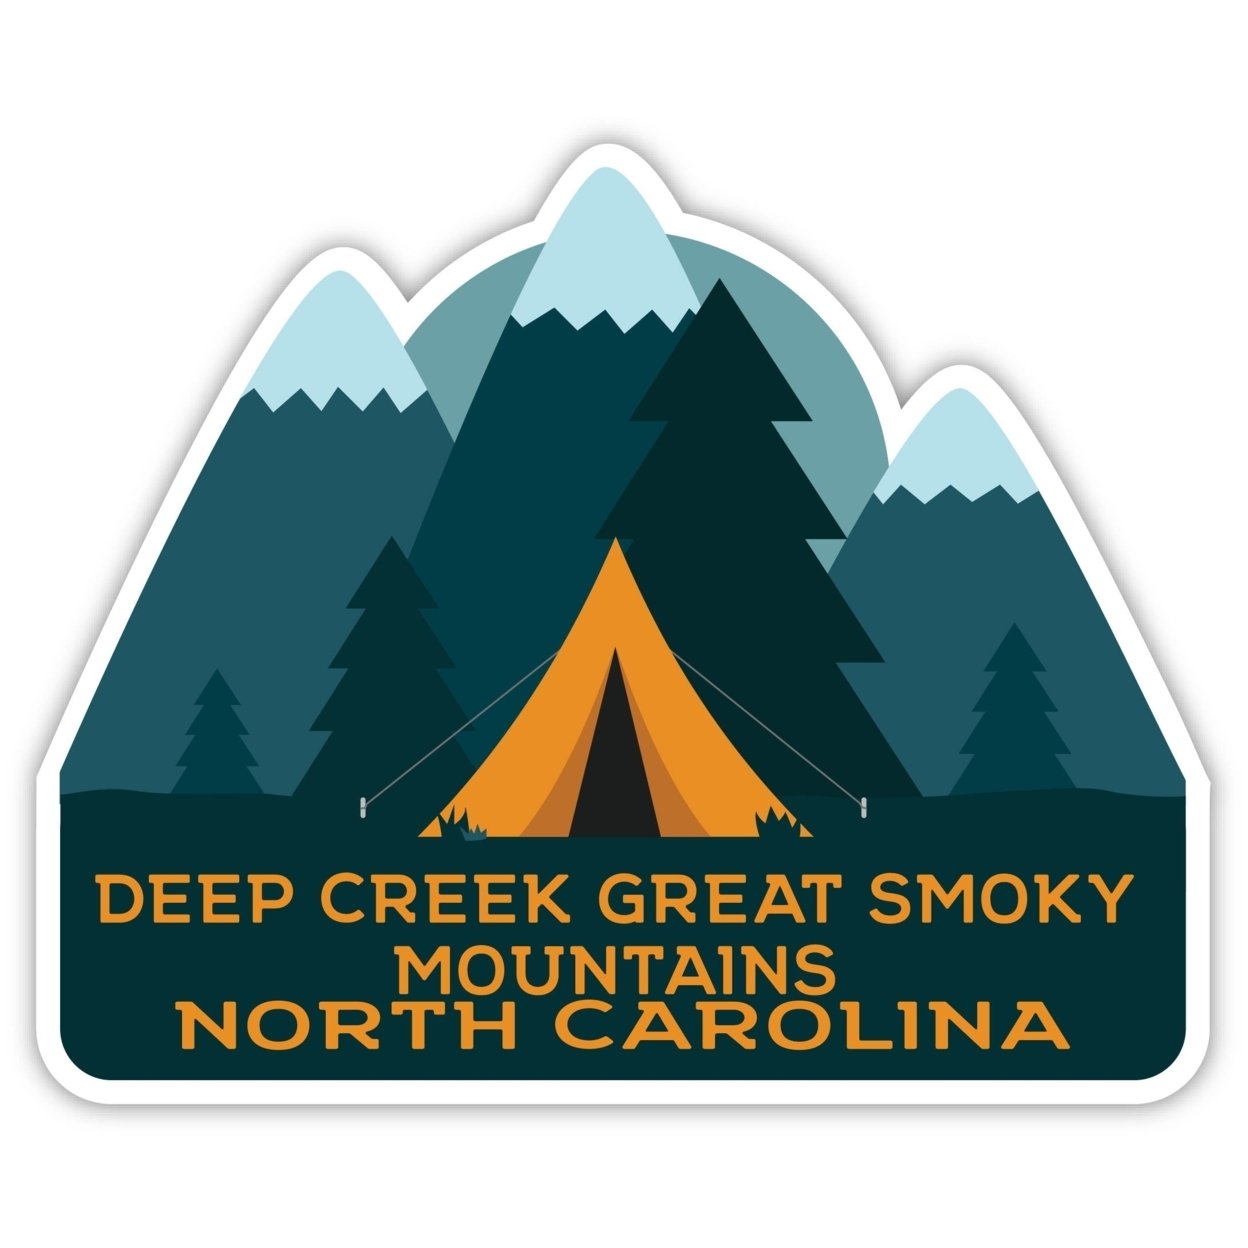 Deep Creek Great Smoky Mountains North Carolina Souvenir Decorative Stickers (Choose Theme And Size) - 4-Pack, 10-Inch, Tent